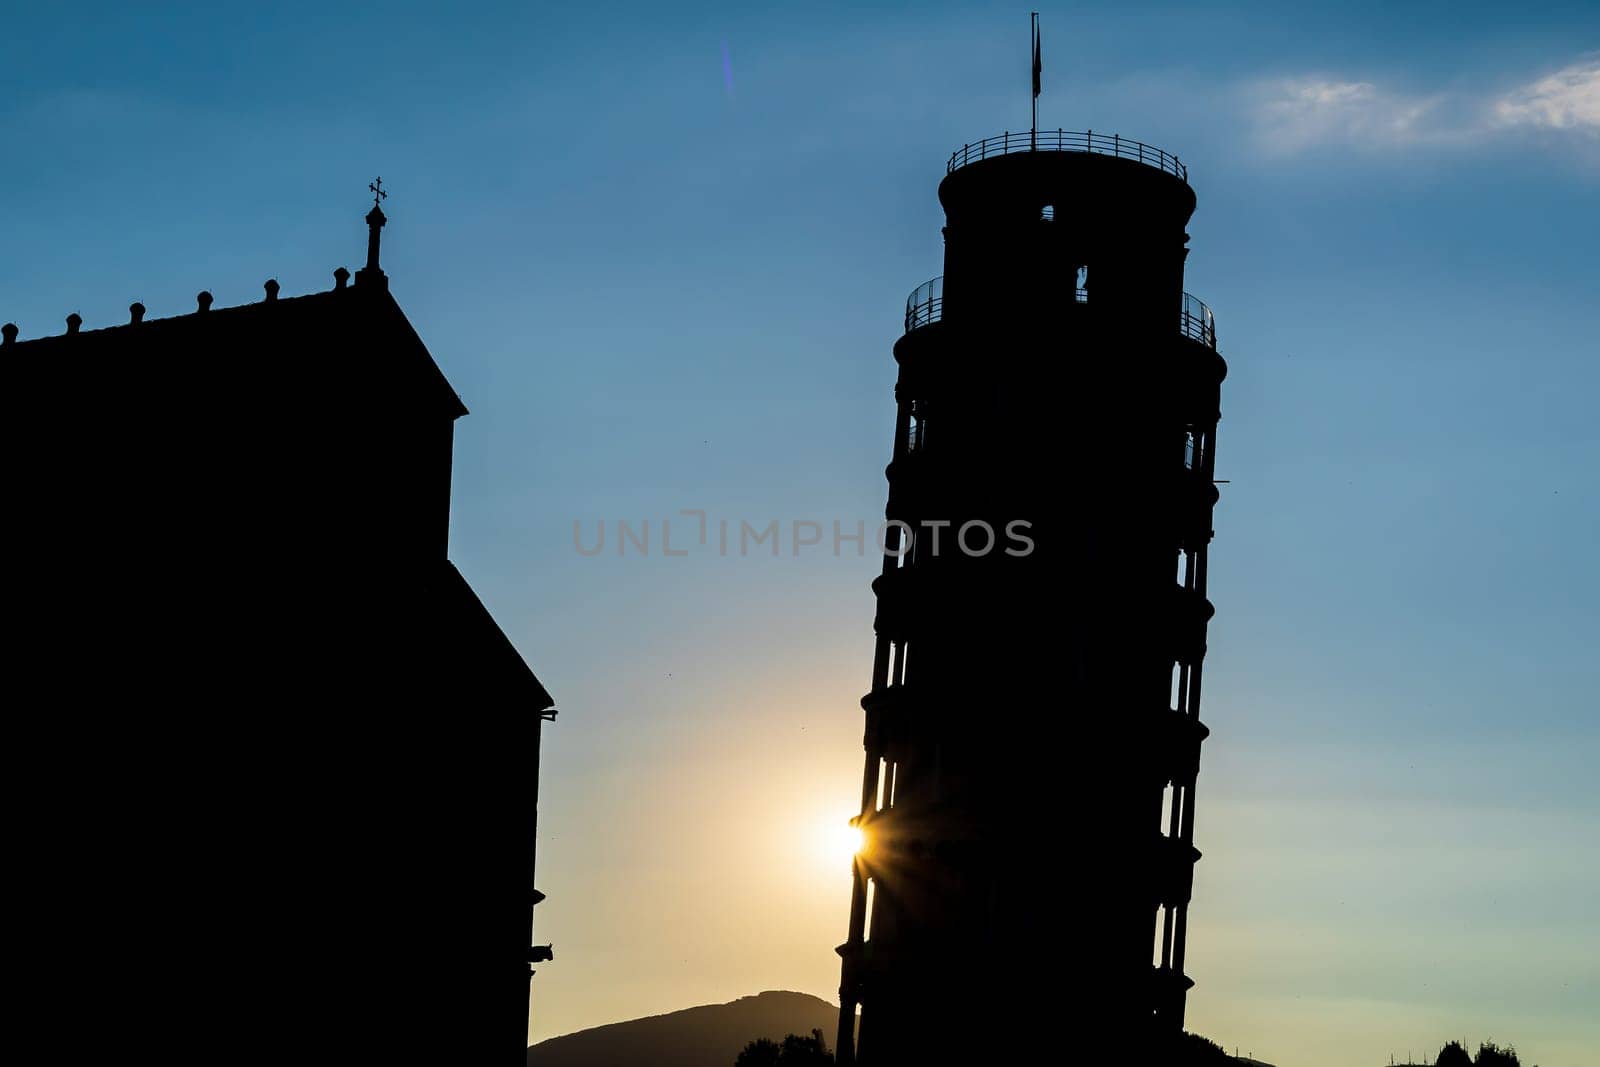 Silhouette shot of The famous Leaning Tower in Pisa, Italy by f11photo